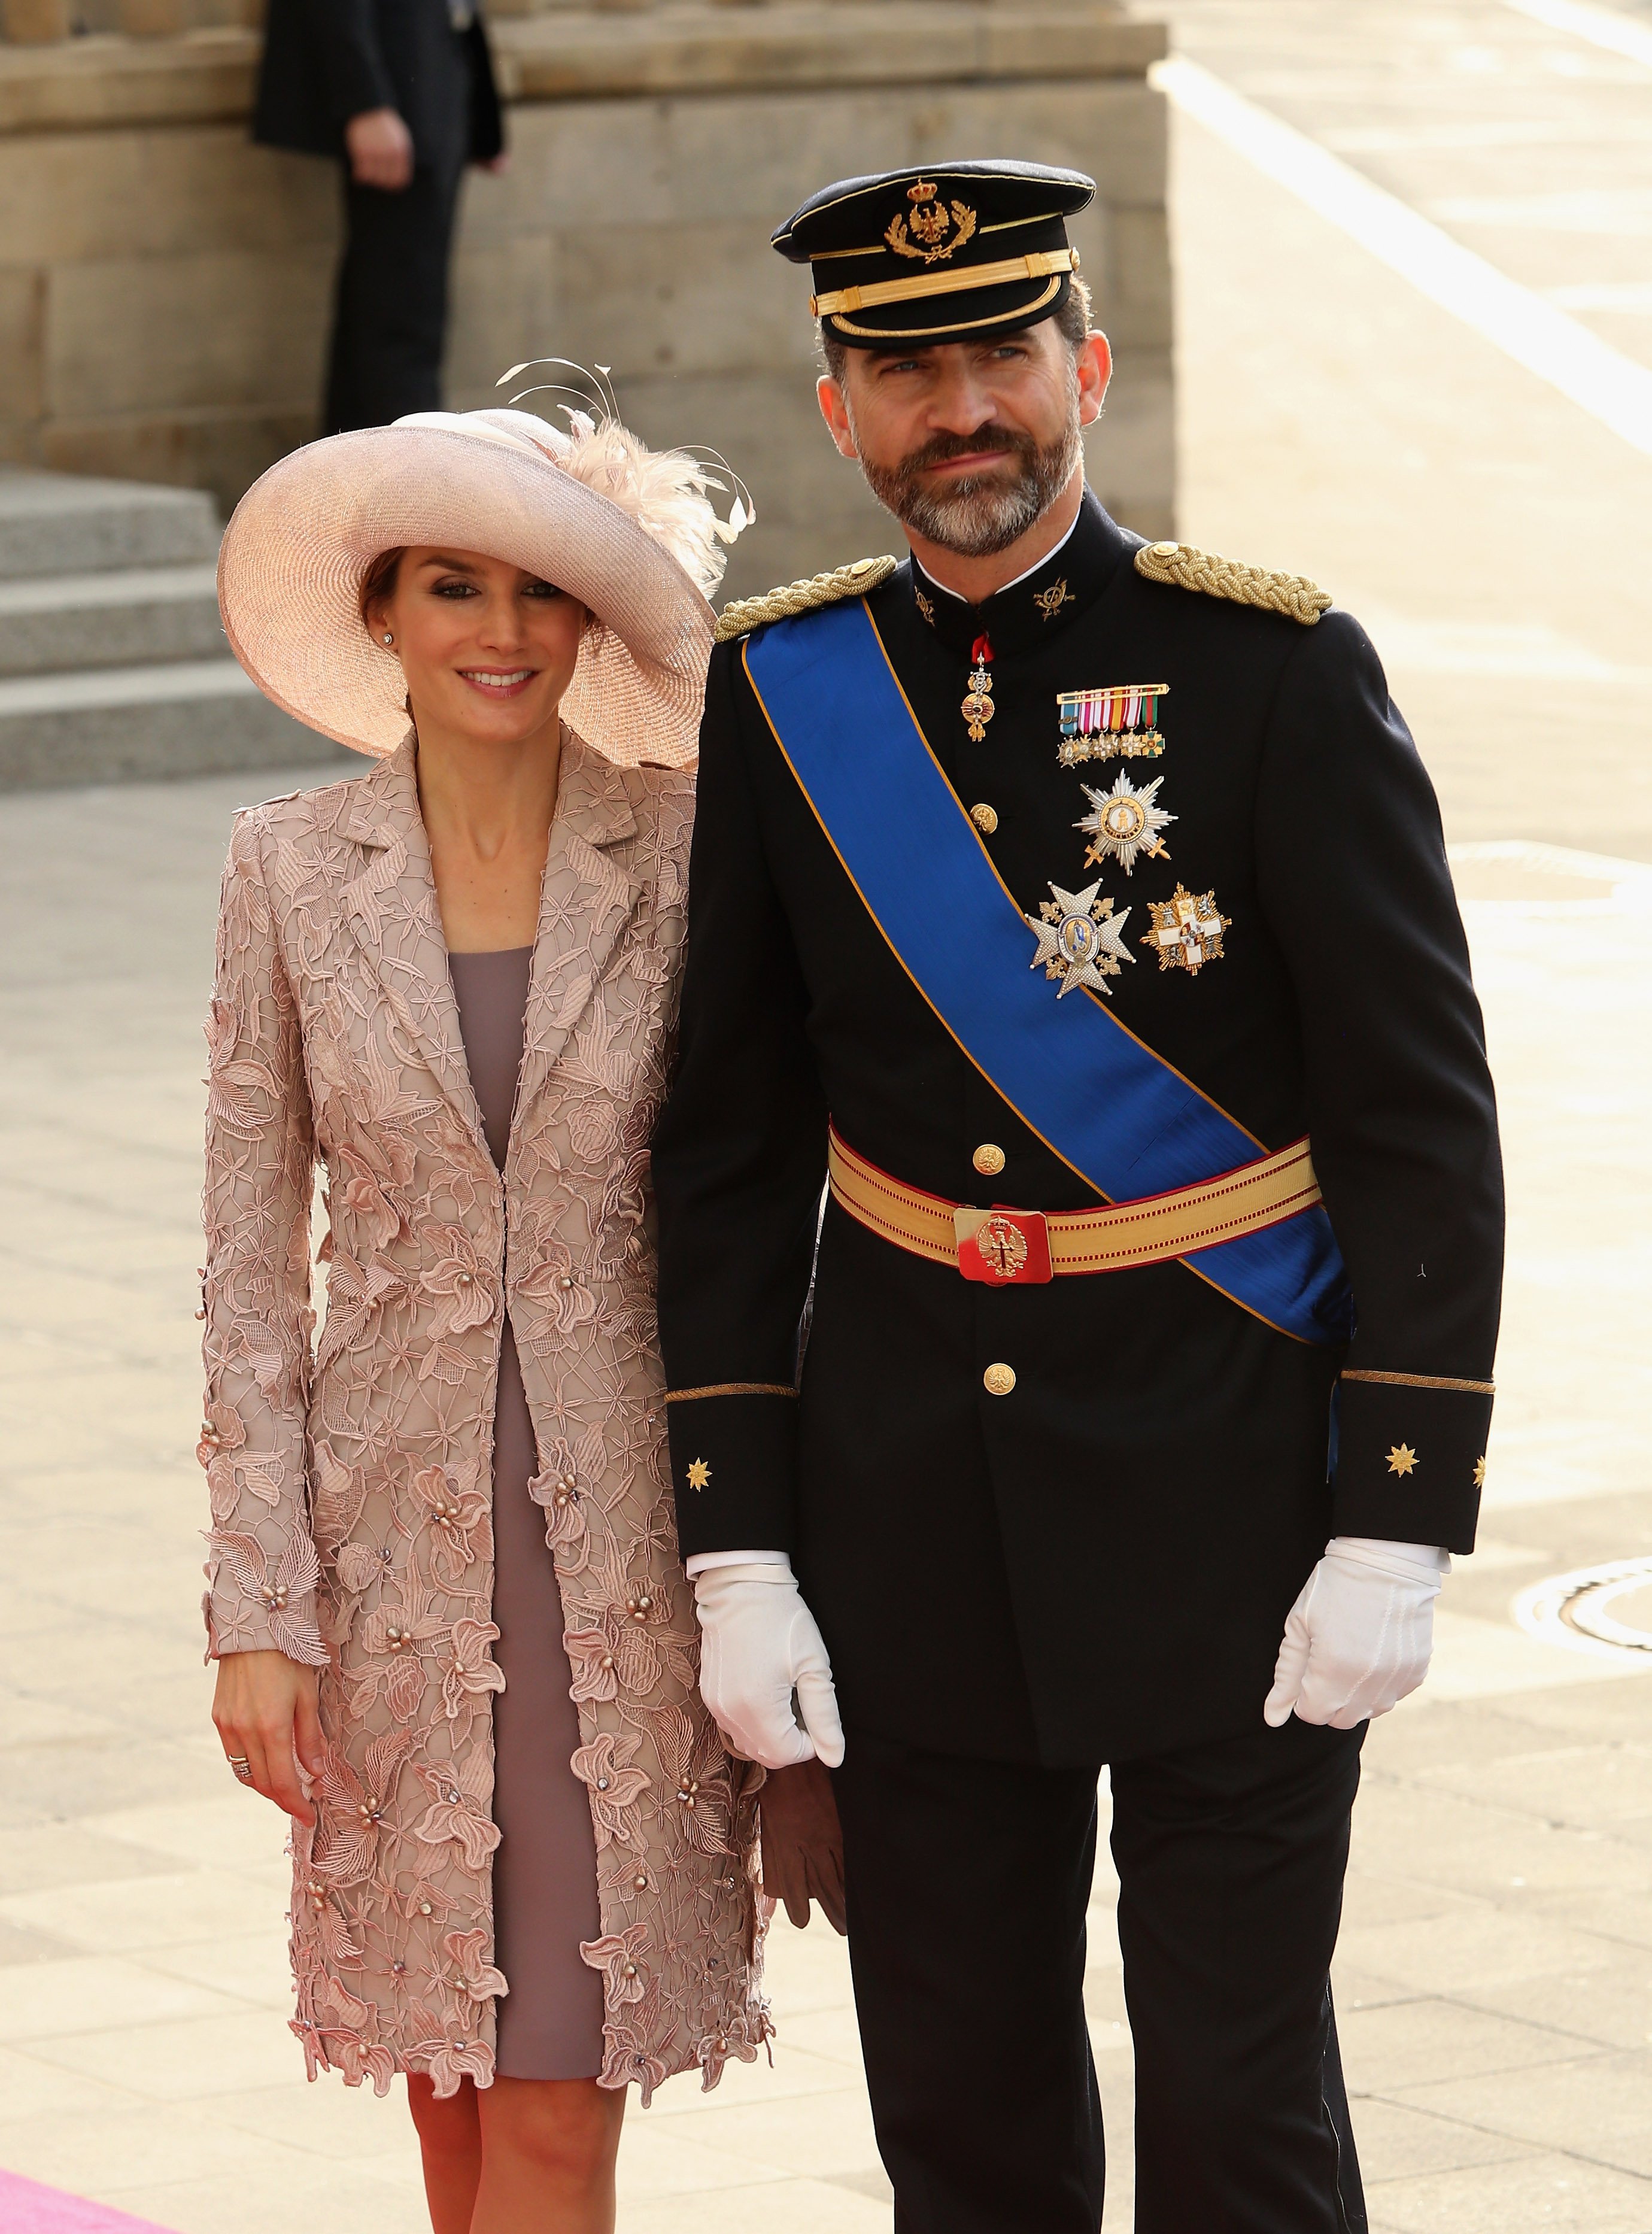 Princess Letizia of Spain and Prince Felipe attending the wedding ceremony of Prince Guillaume Of Luxembourg and Princess Stephanie of Luxembourg at the Cathedral of our Lady of Luxembourg on October 20, 2012 in Luxembourg, Luxembourg. | Source: Getty Images